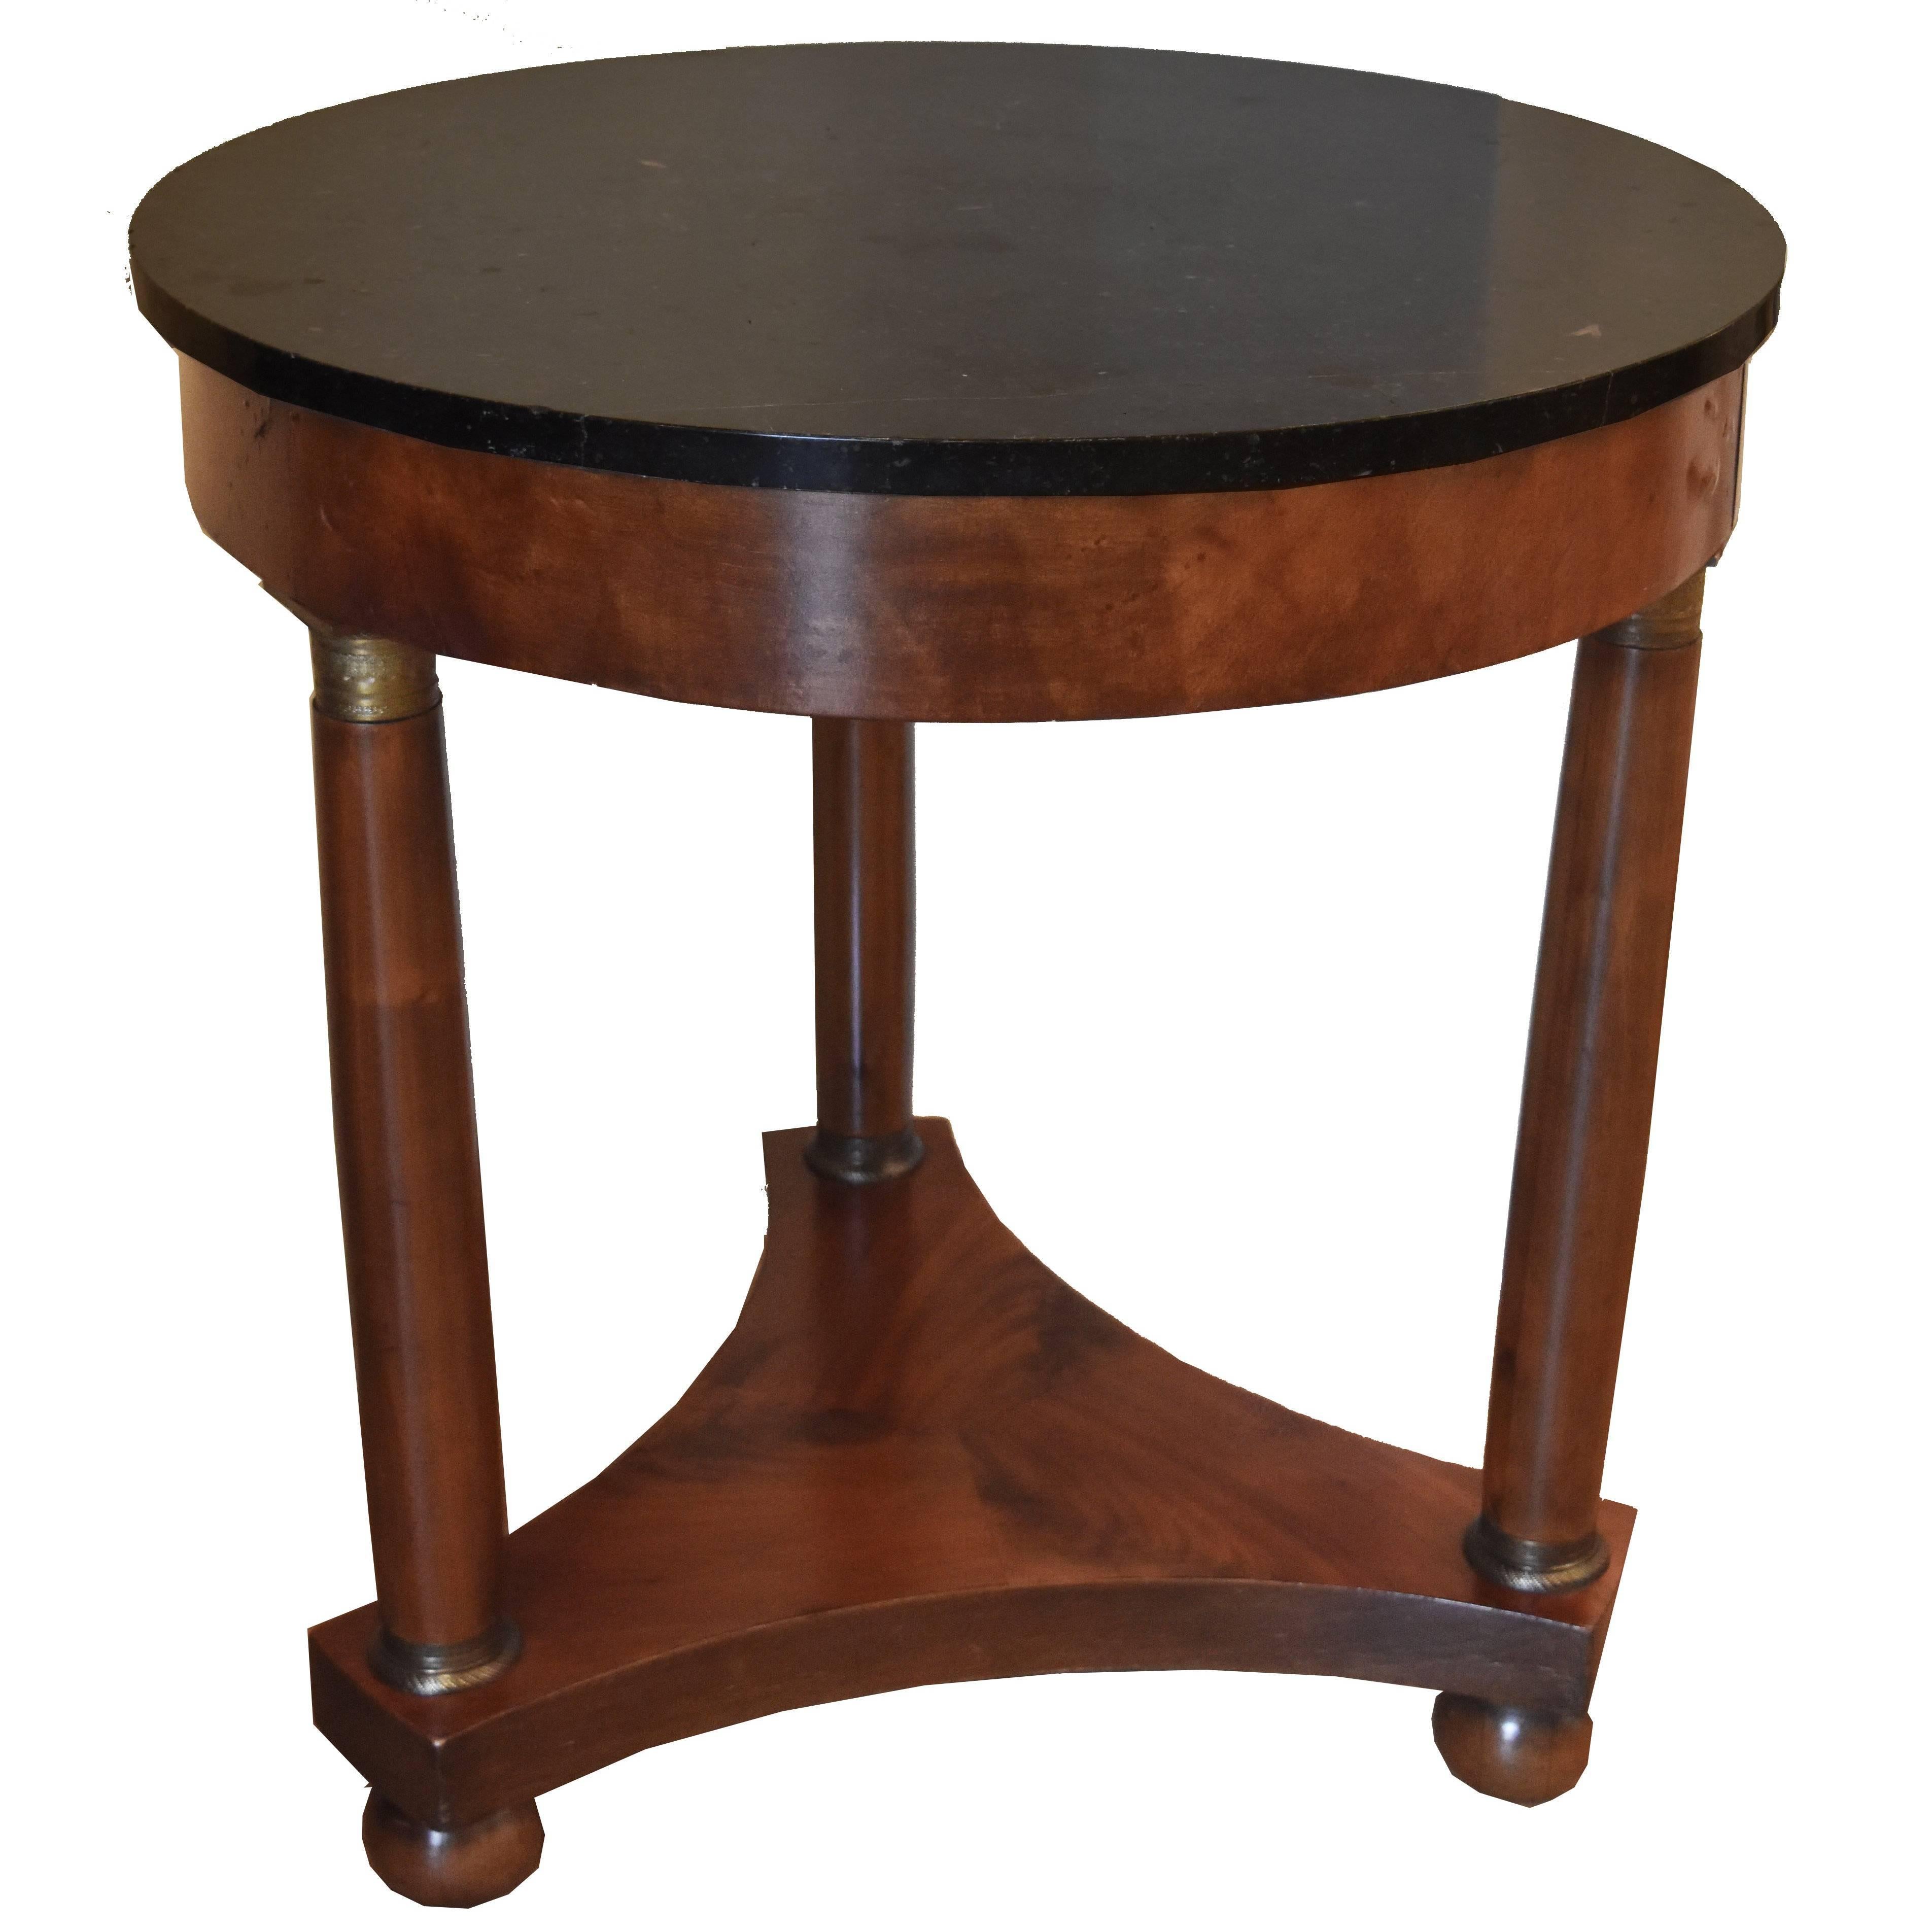 Early 19th Century French Empire Table with Marble Top